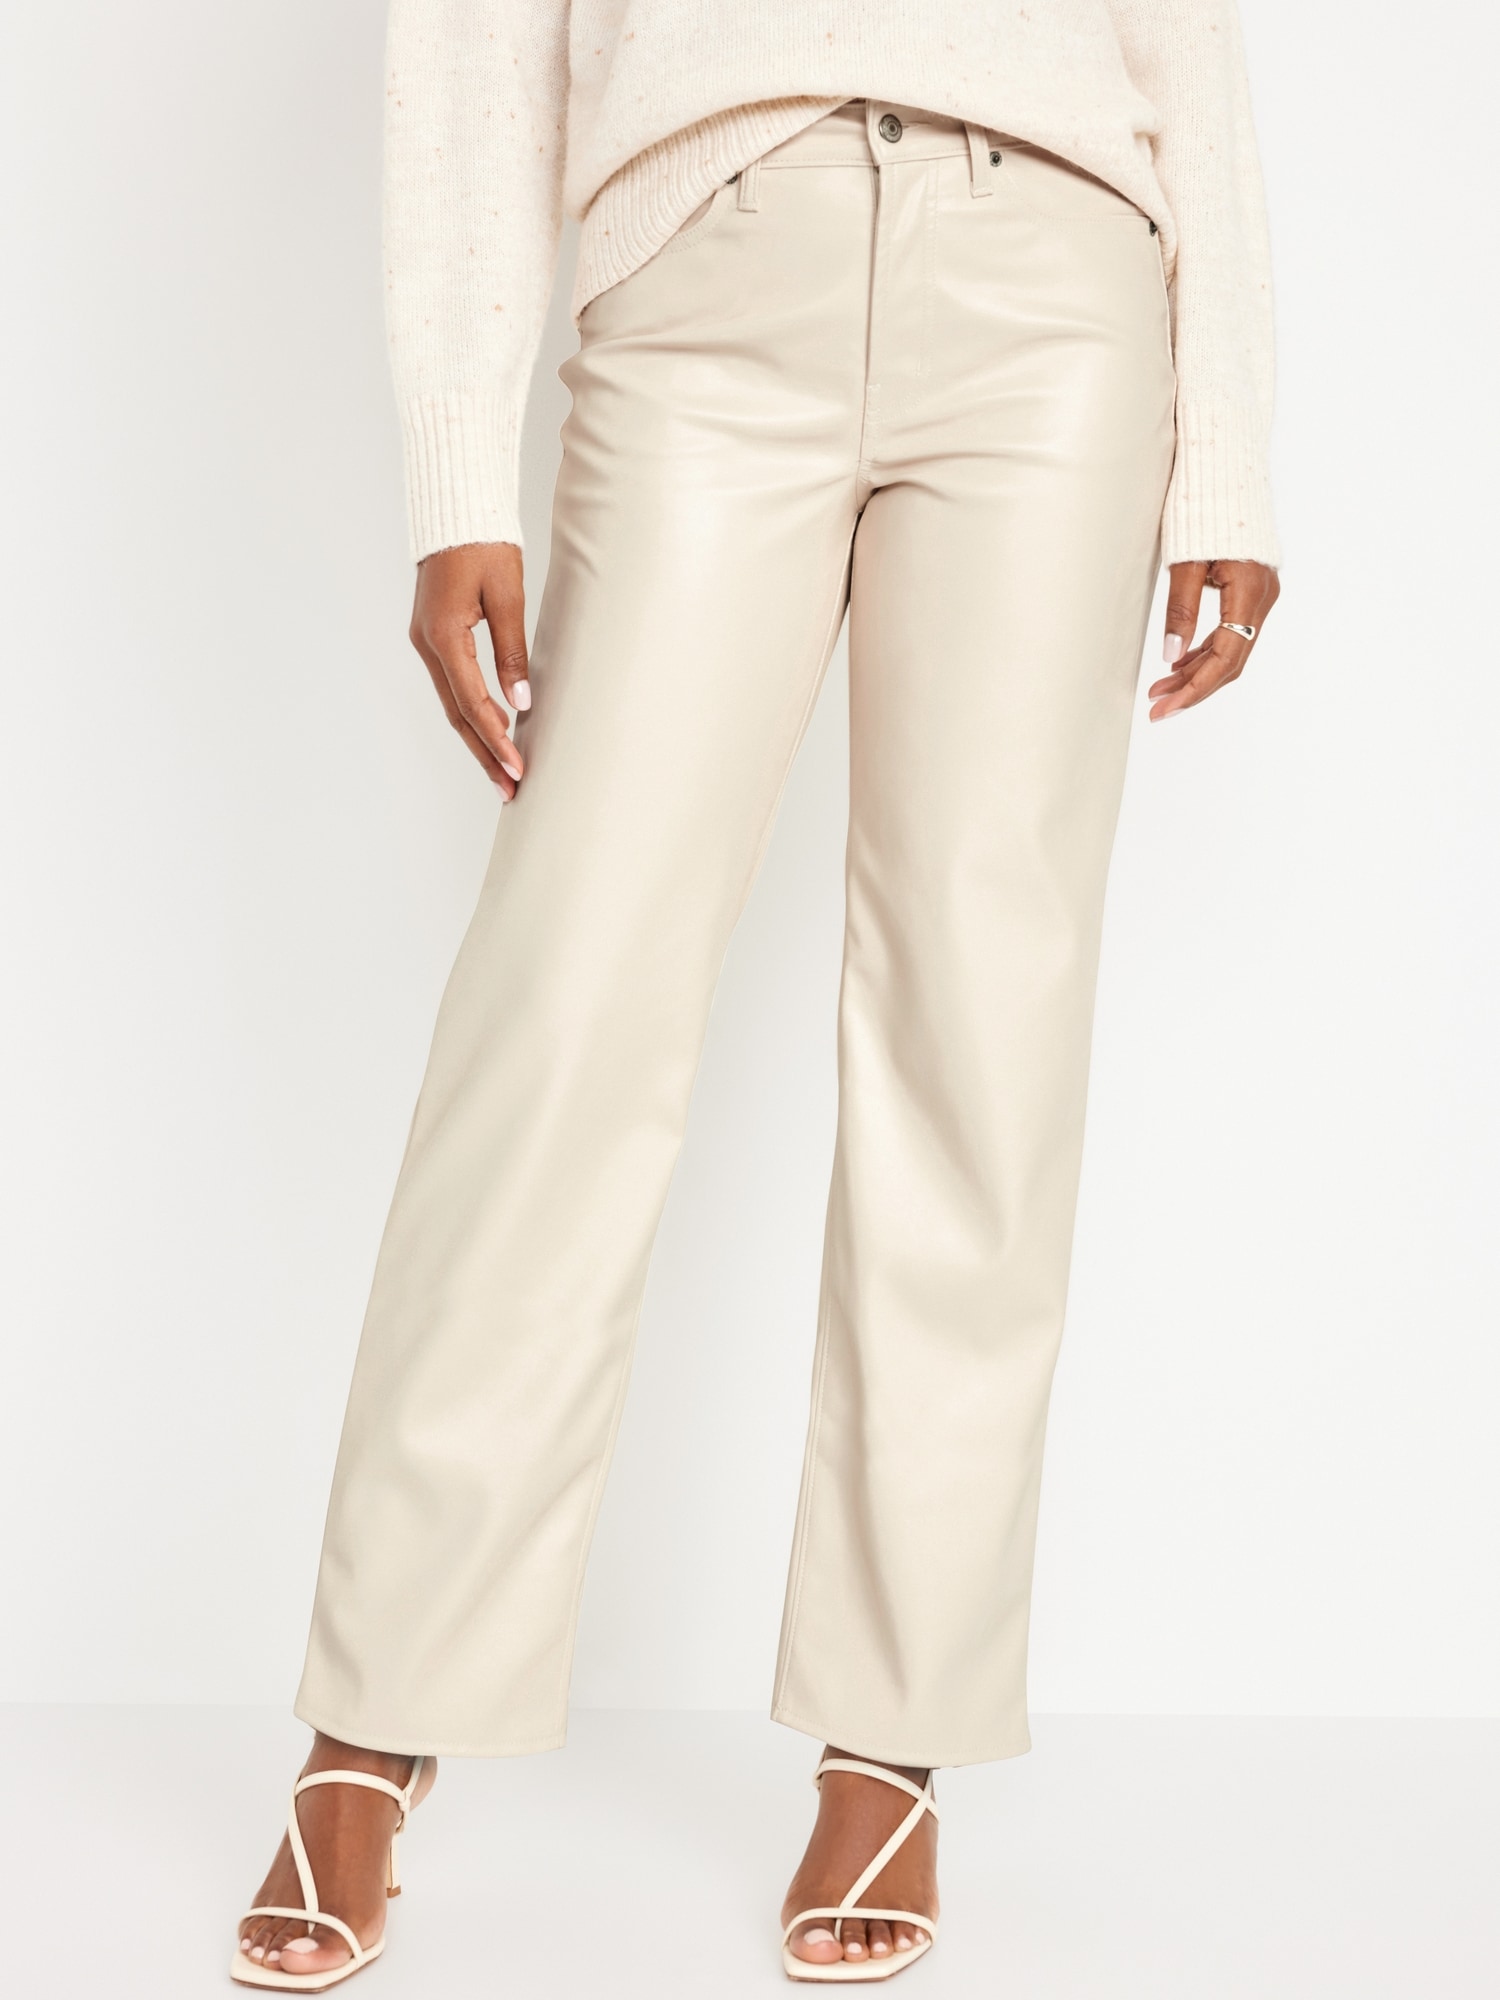 High-Waisted OG Loose Faux-Leather Pants | Old Navy